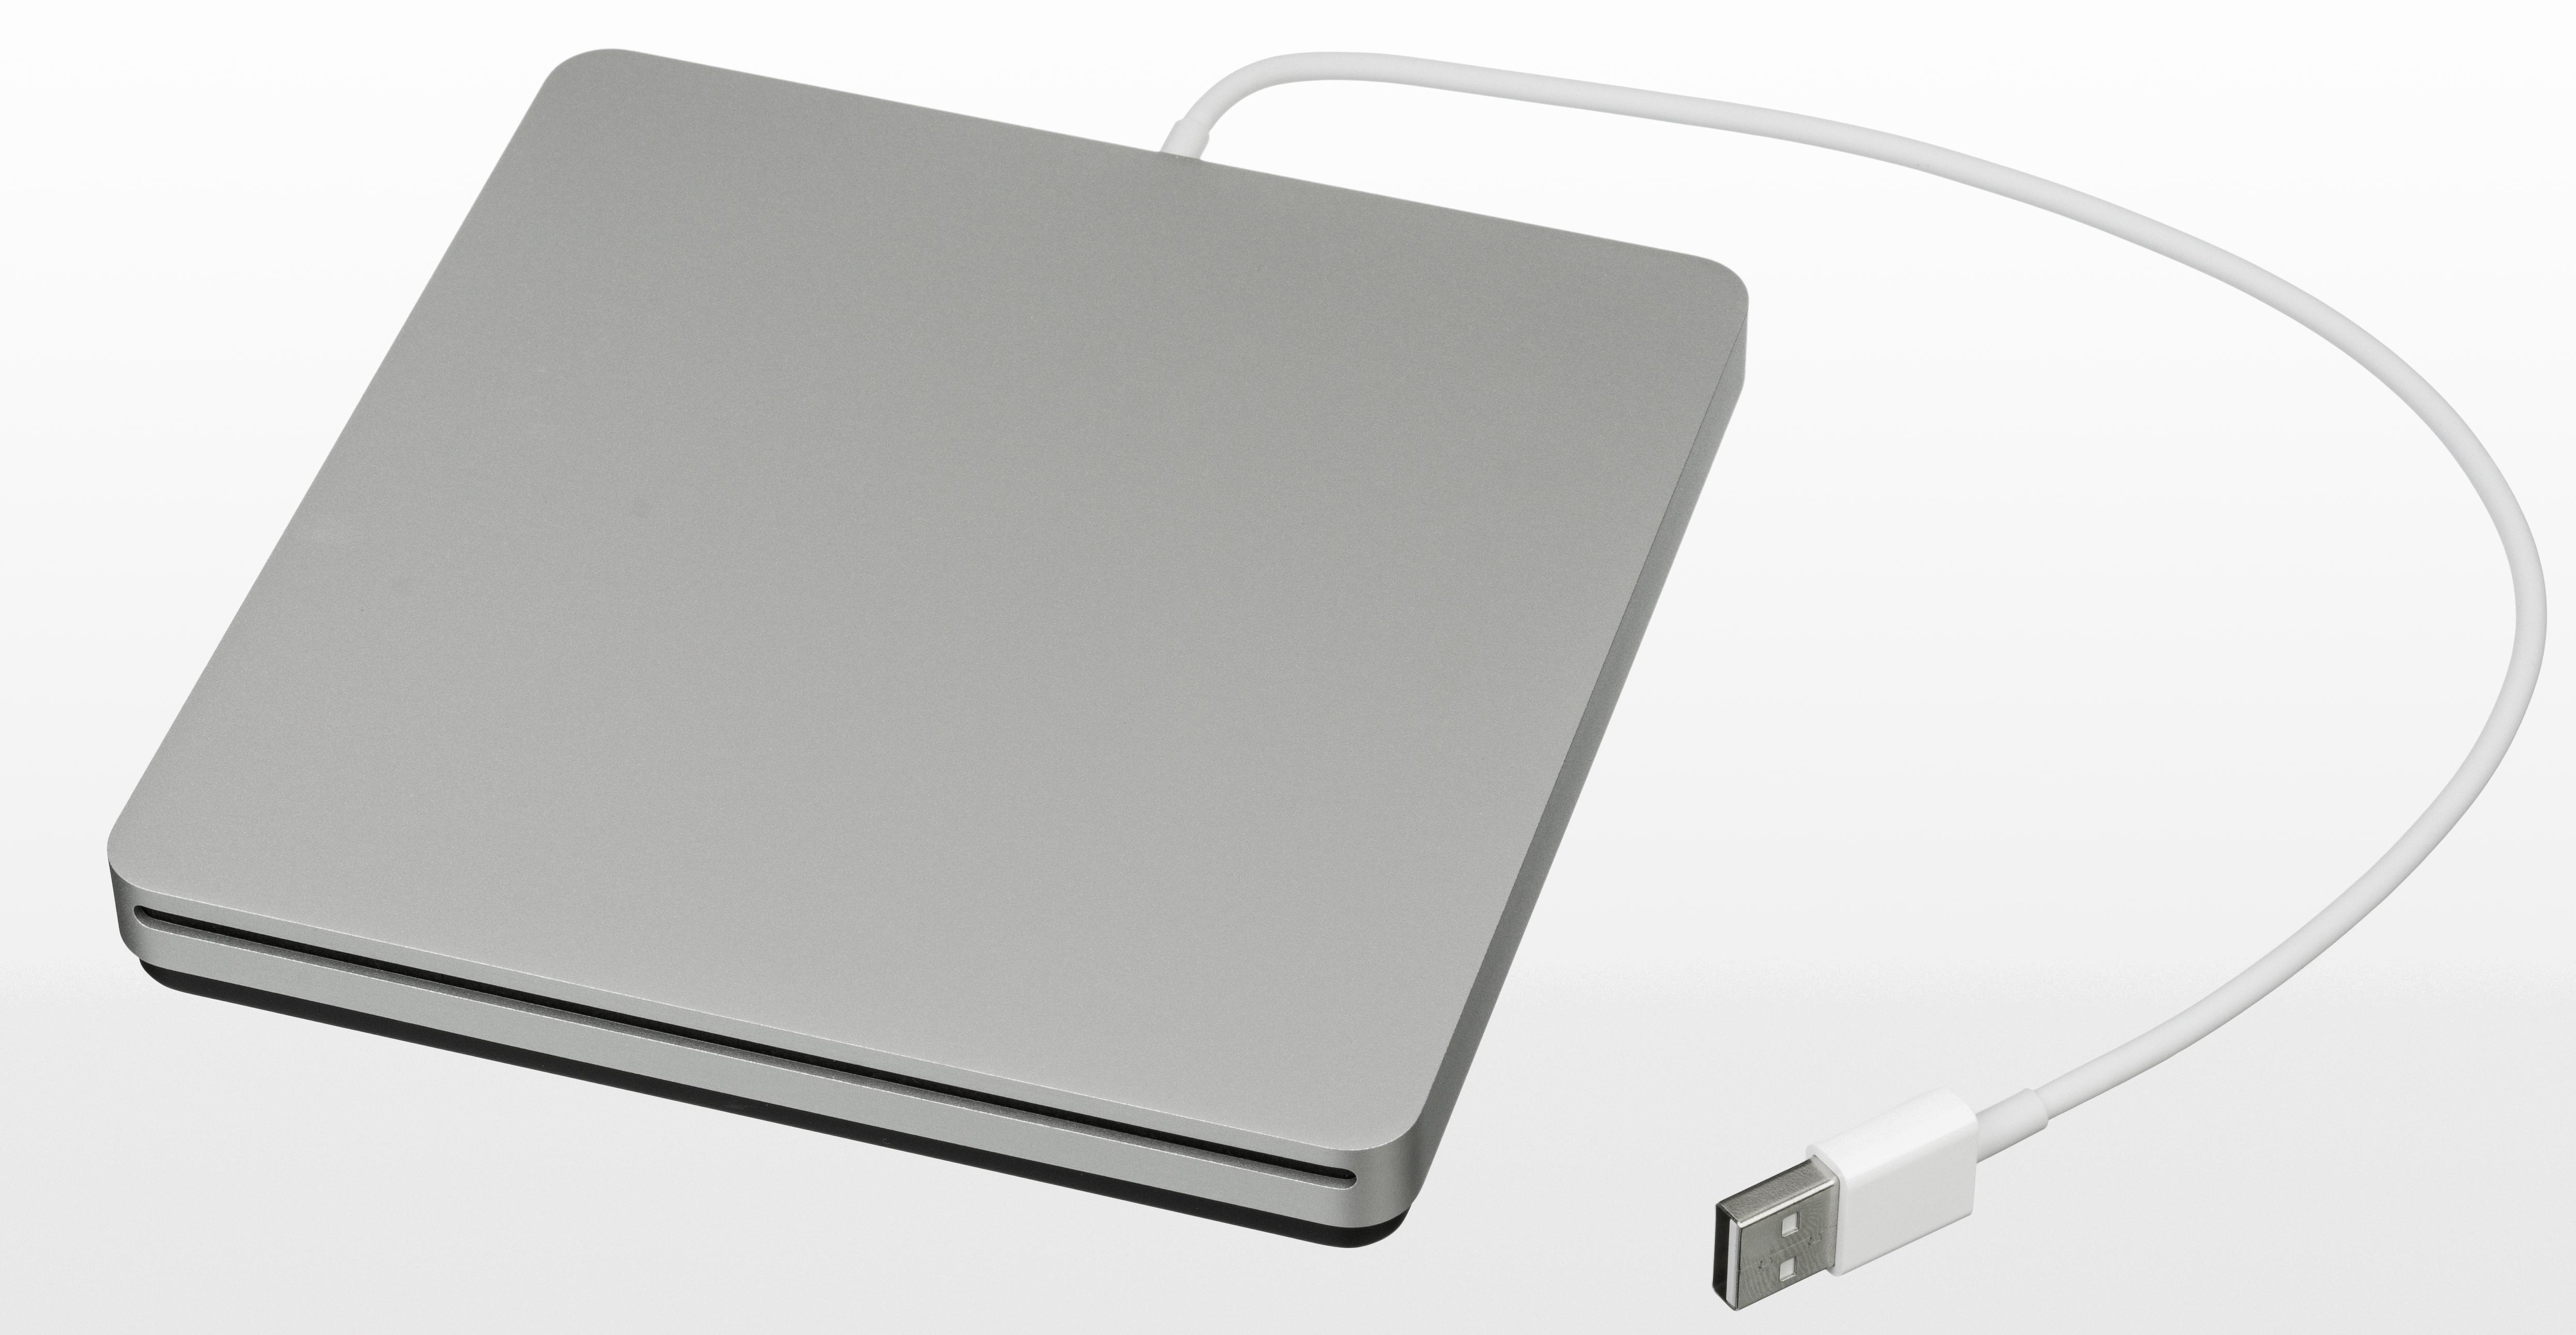 How To Make Usb Superdrive Work With Macbook Pro 15